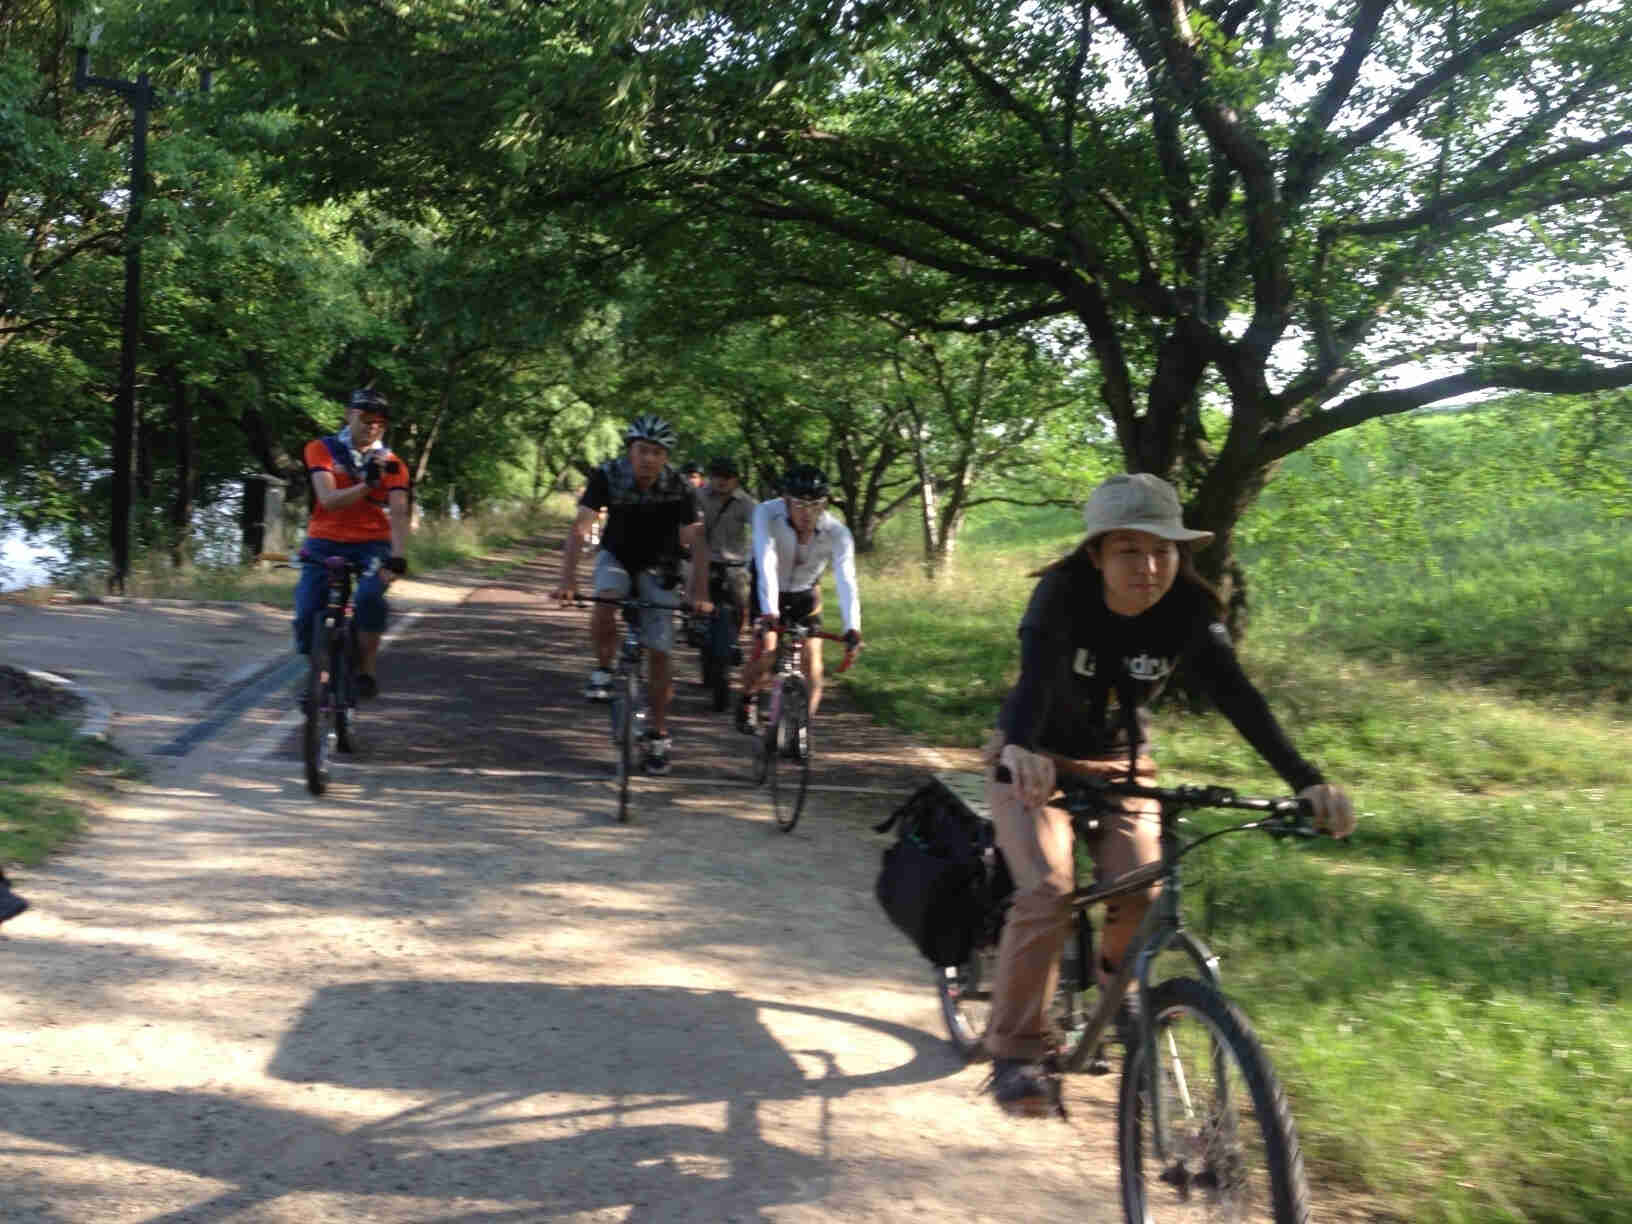 Front view of a group of cyclists, riding on a gravel bike trail, with trees lined up on both sides